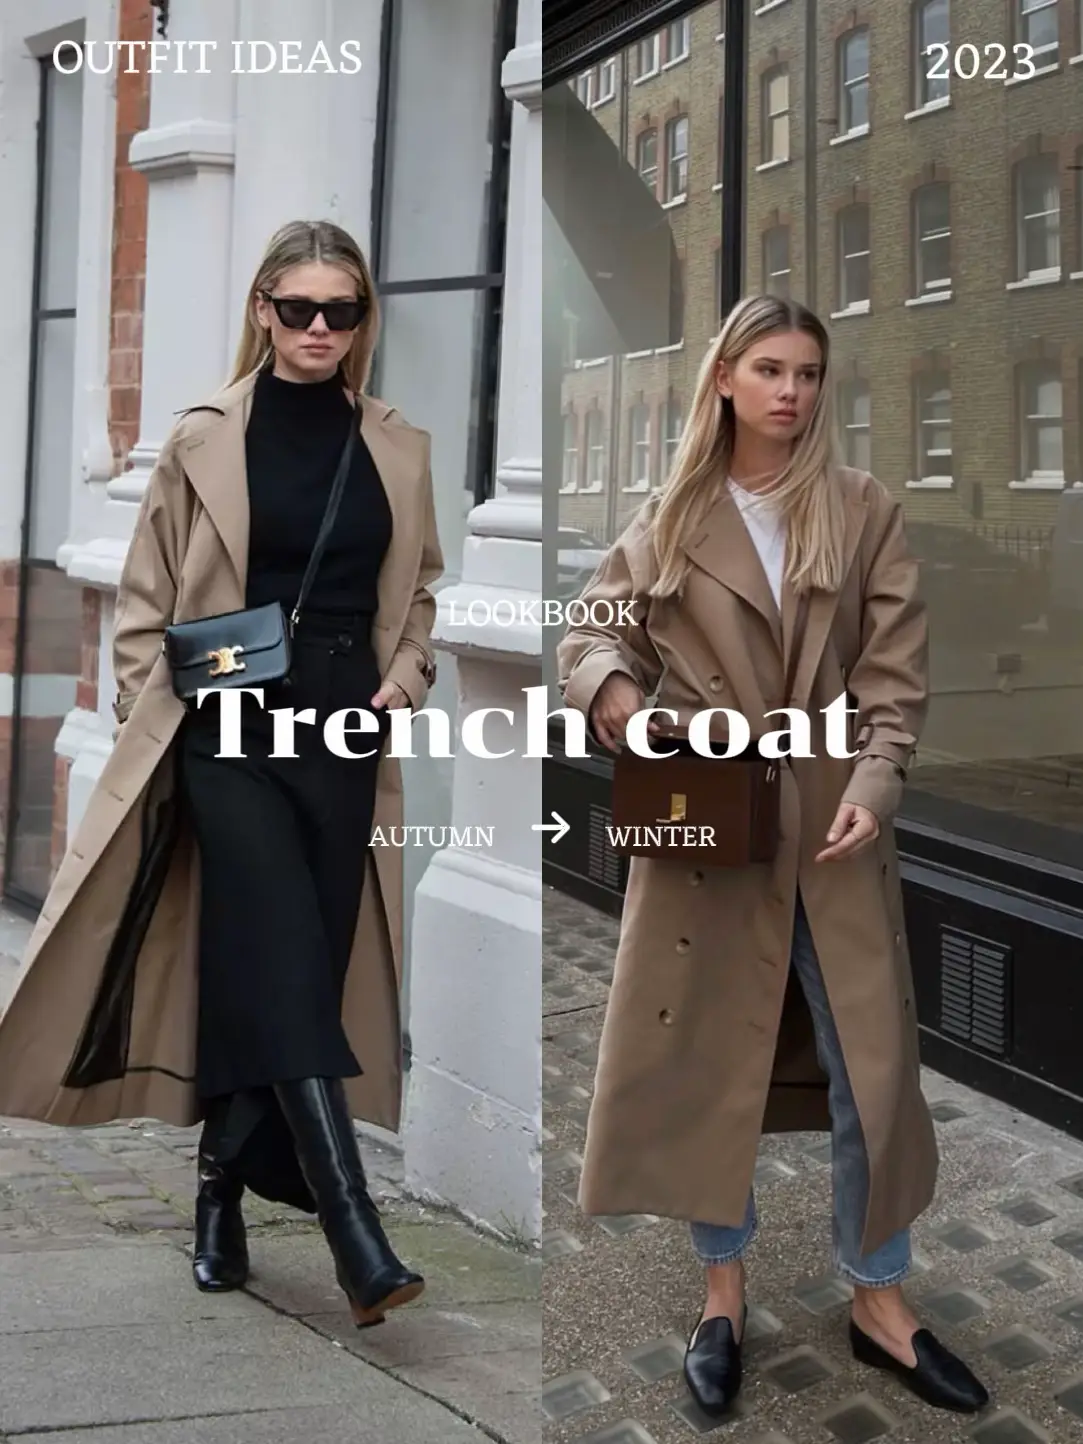 Trench coat autumn outfit ideas 🍂🤎😳 Yes or no?